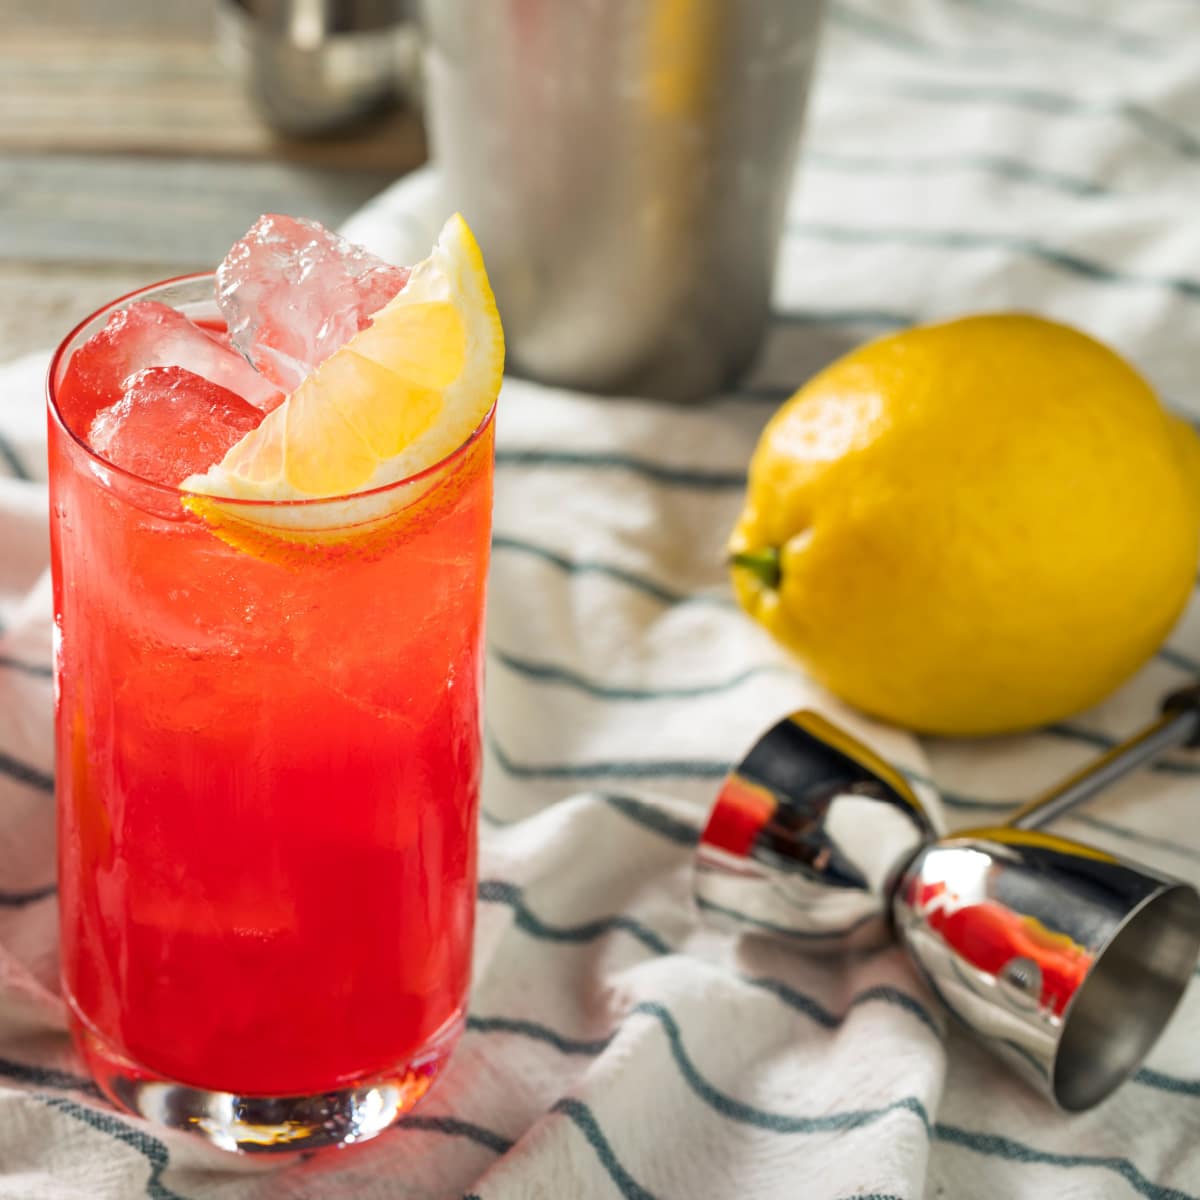 A glass of ice cold red orangey cocktail garnished with lemon slice, whole lemon and jigger beside. 